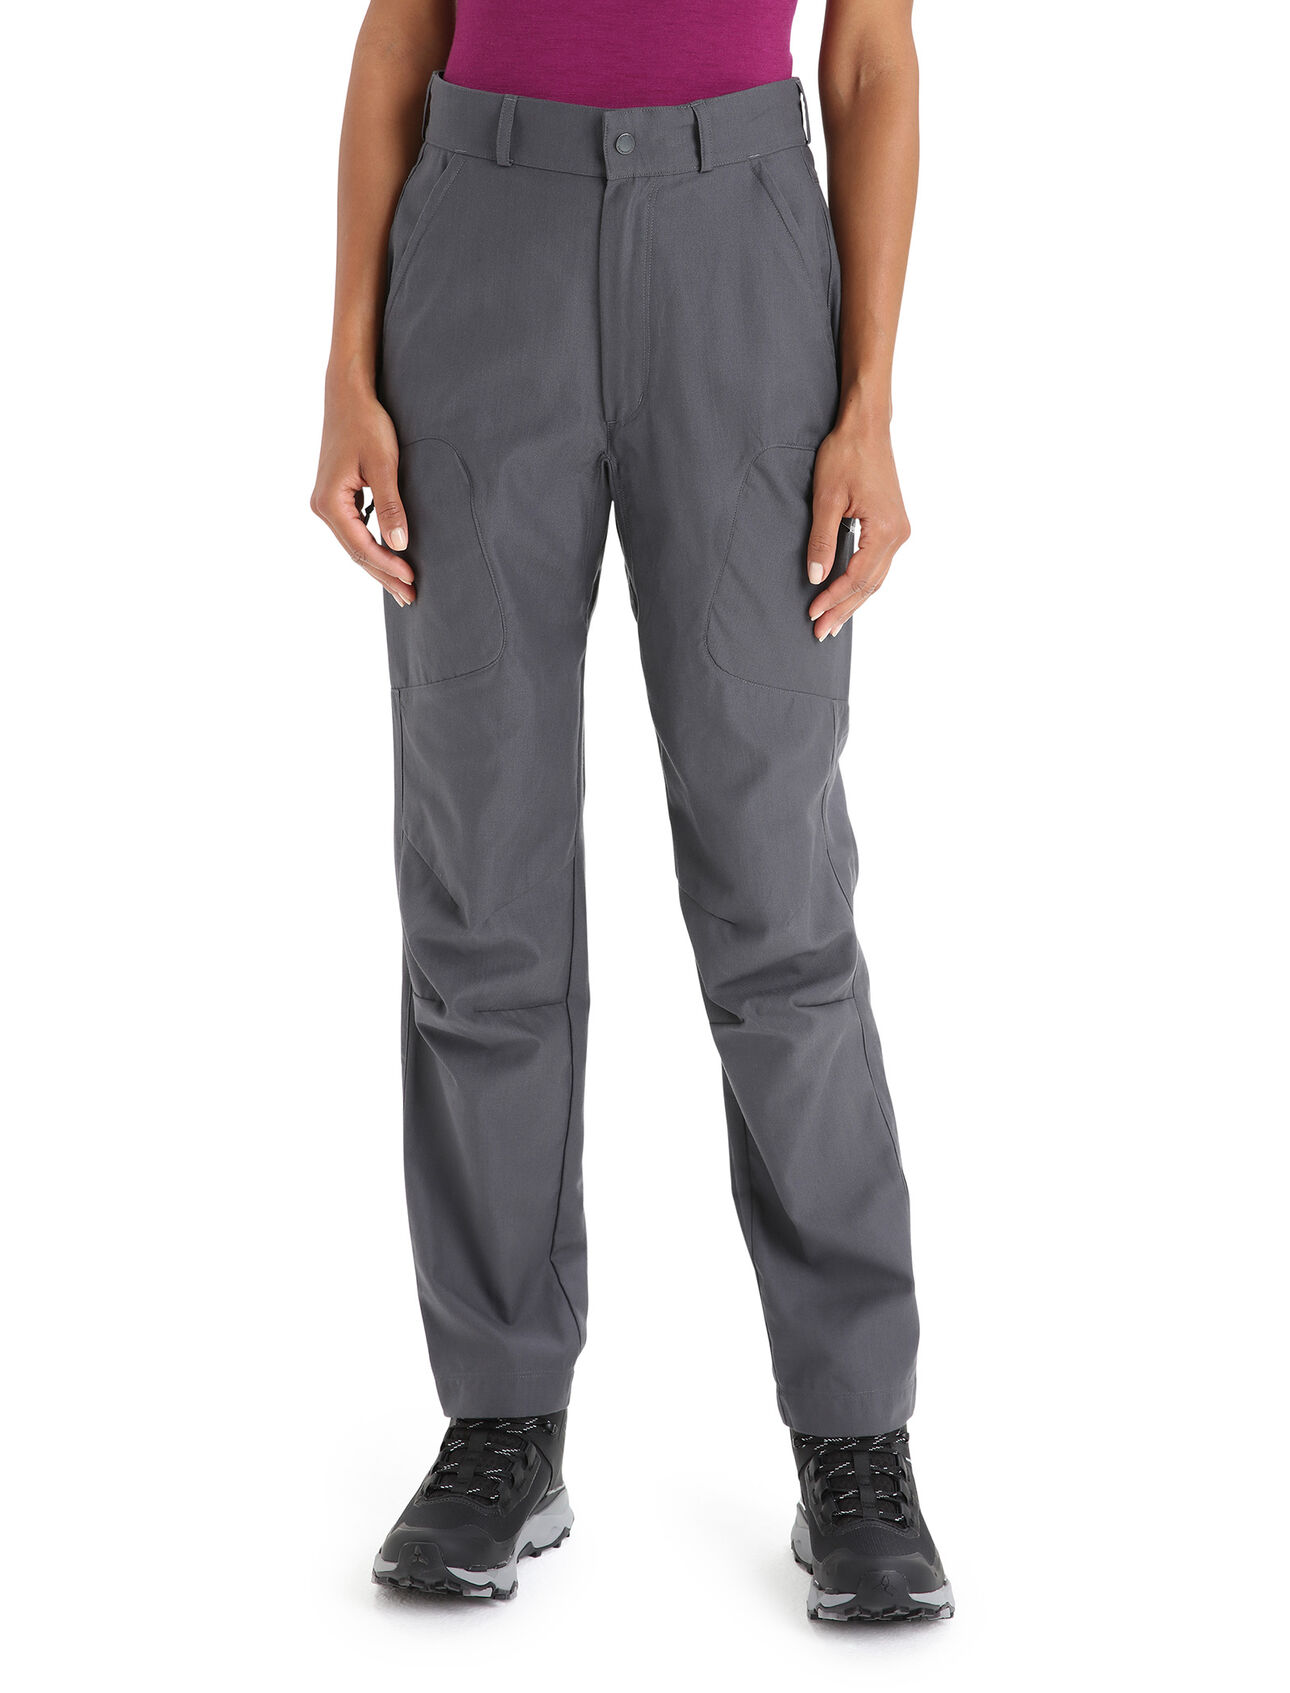 Womens Merino Hike Trousers A durable and dependable mountain pant made from a unique blend of merino wool and organic cotton, the Hike Pants are perfect for mountain adventures of all kinds.